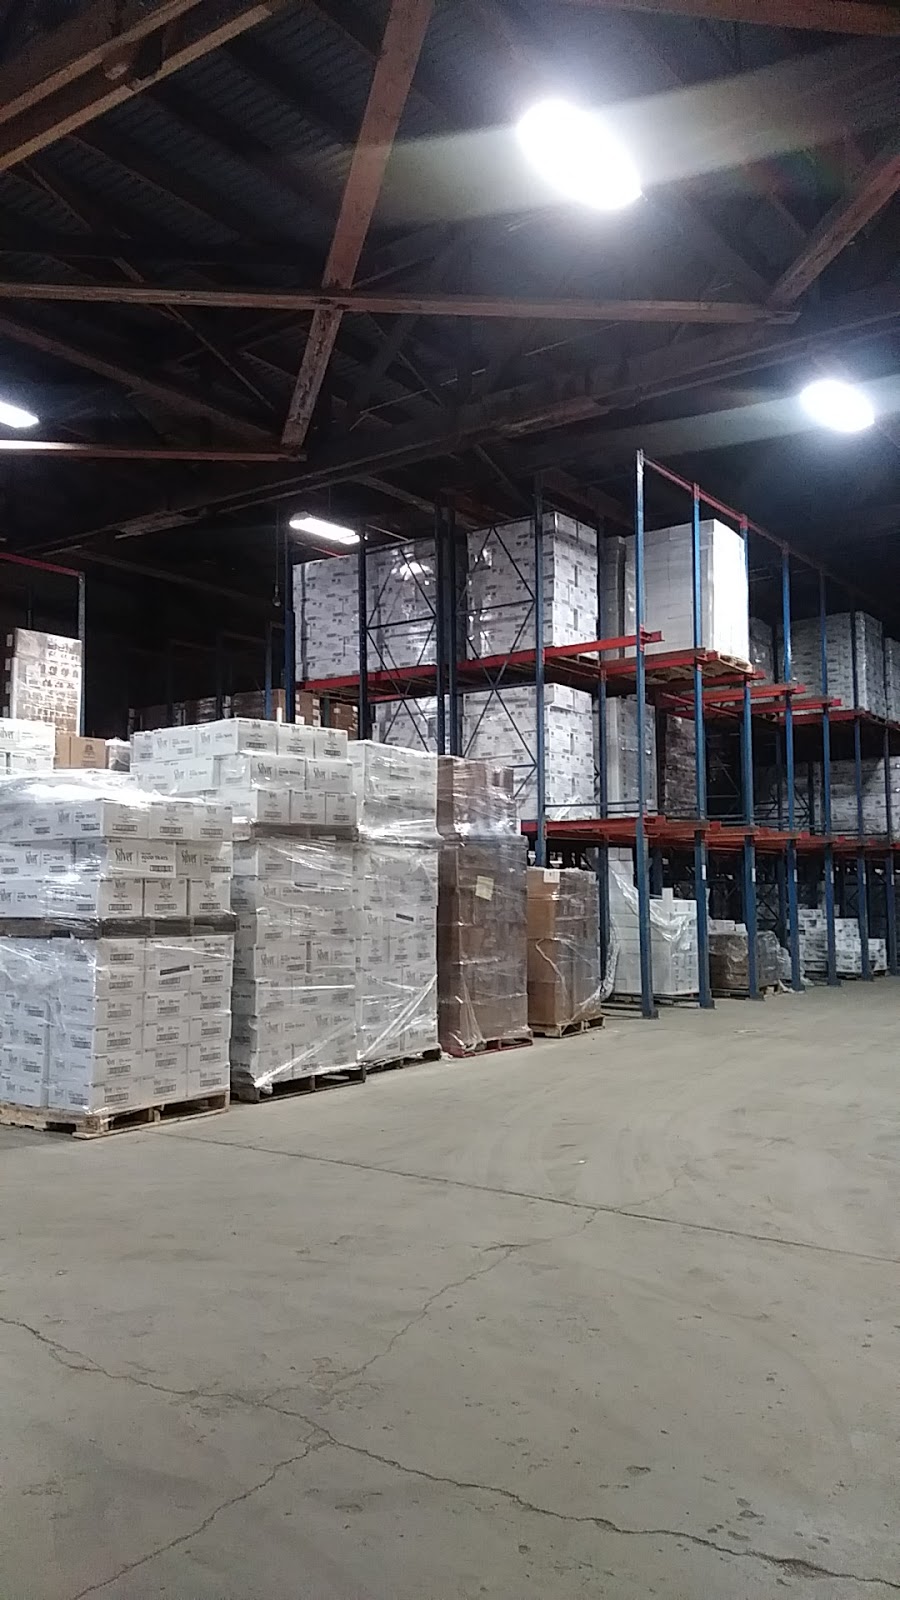 Specialty Quality Packaging | Potential Pkwy, Scotia, NY 12302 | Phone: (518) 831-6800